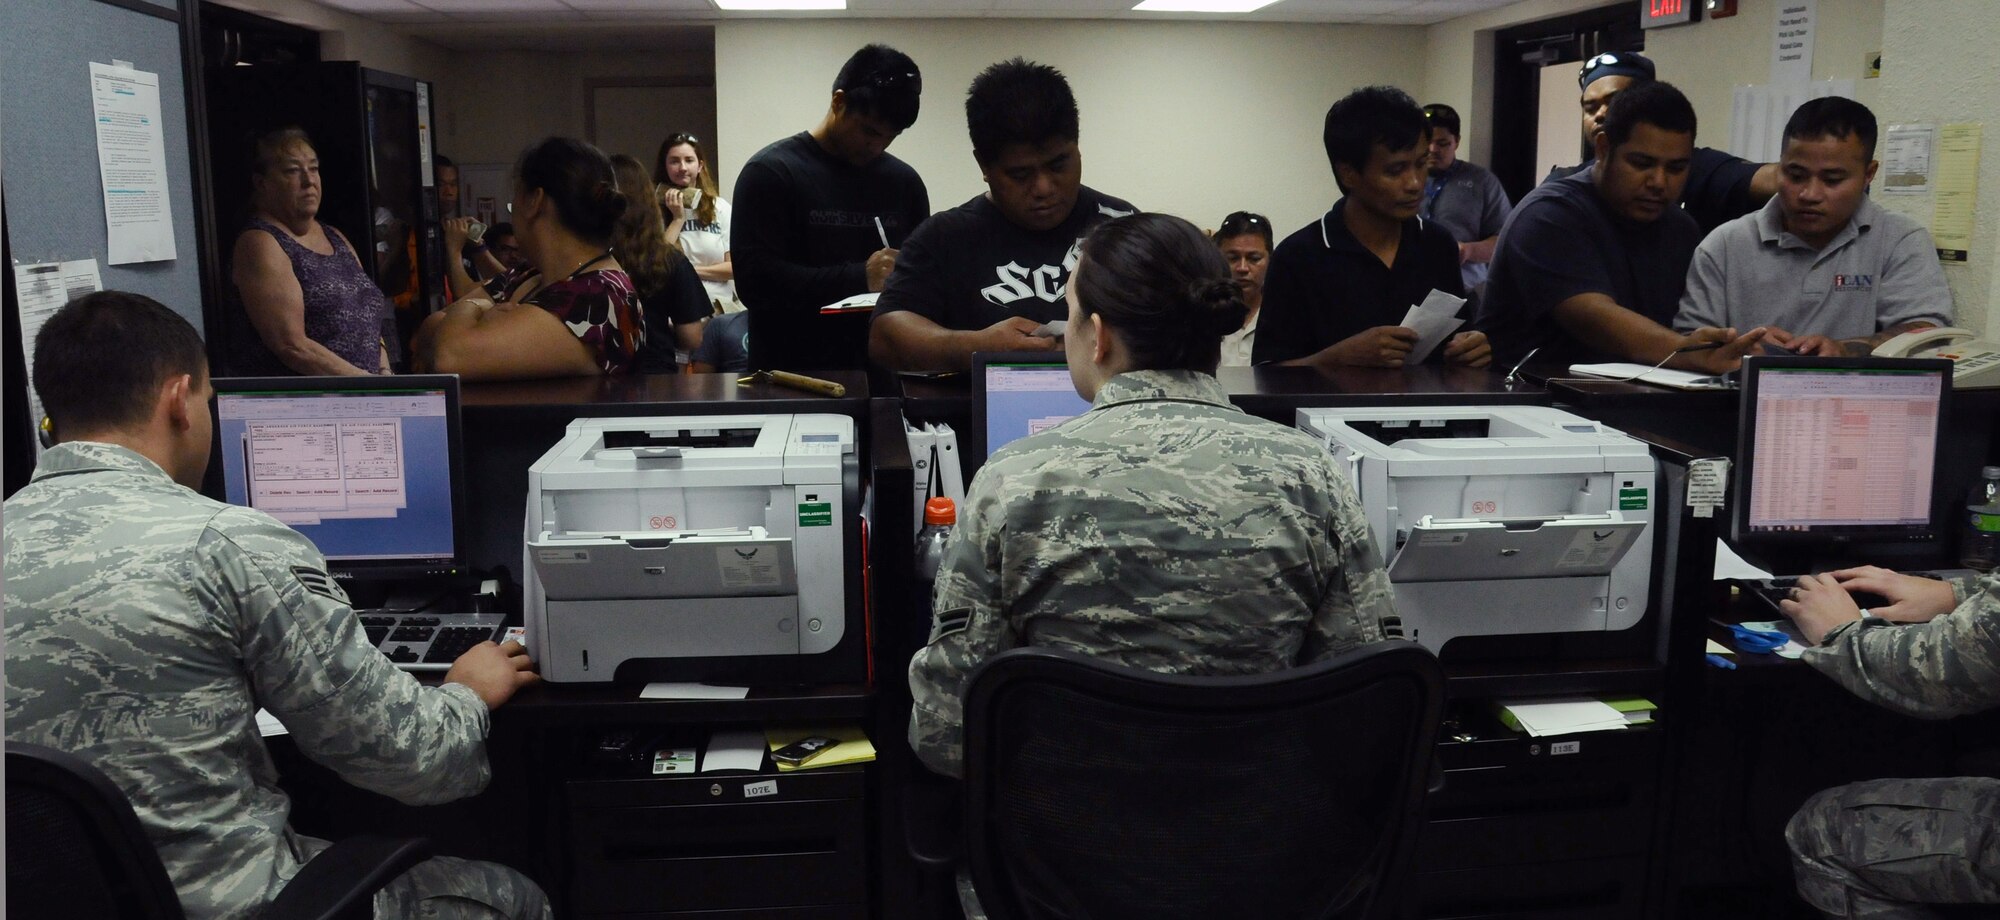 Senior Airman Aaron Rustici and Airman 1st Class Randi Hormig, pass and registration clerks from the 36th Security Forces Squadron, assist customers at the Visitor Control Center at Andersen Air Force Base, Guam, Jan. 2, 2013. The VCC services from 200 to 300 customers a day. ( U.S. Air Force photo by Airman 1st Class Mariah Haddenham/Released)